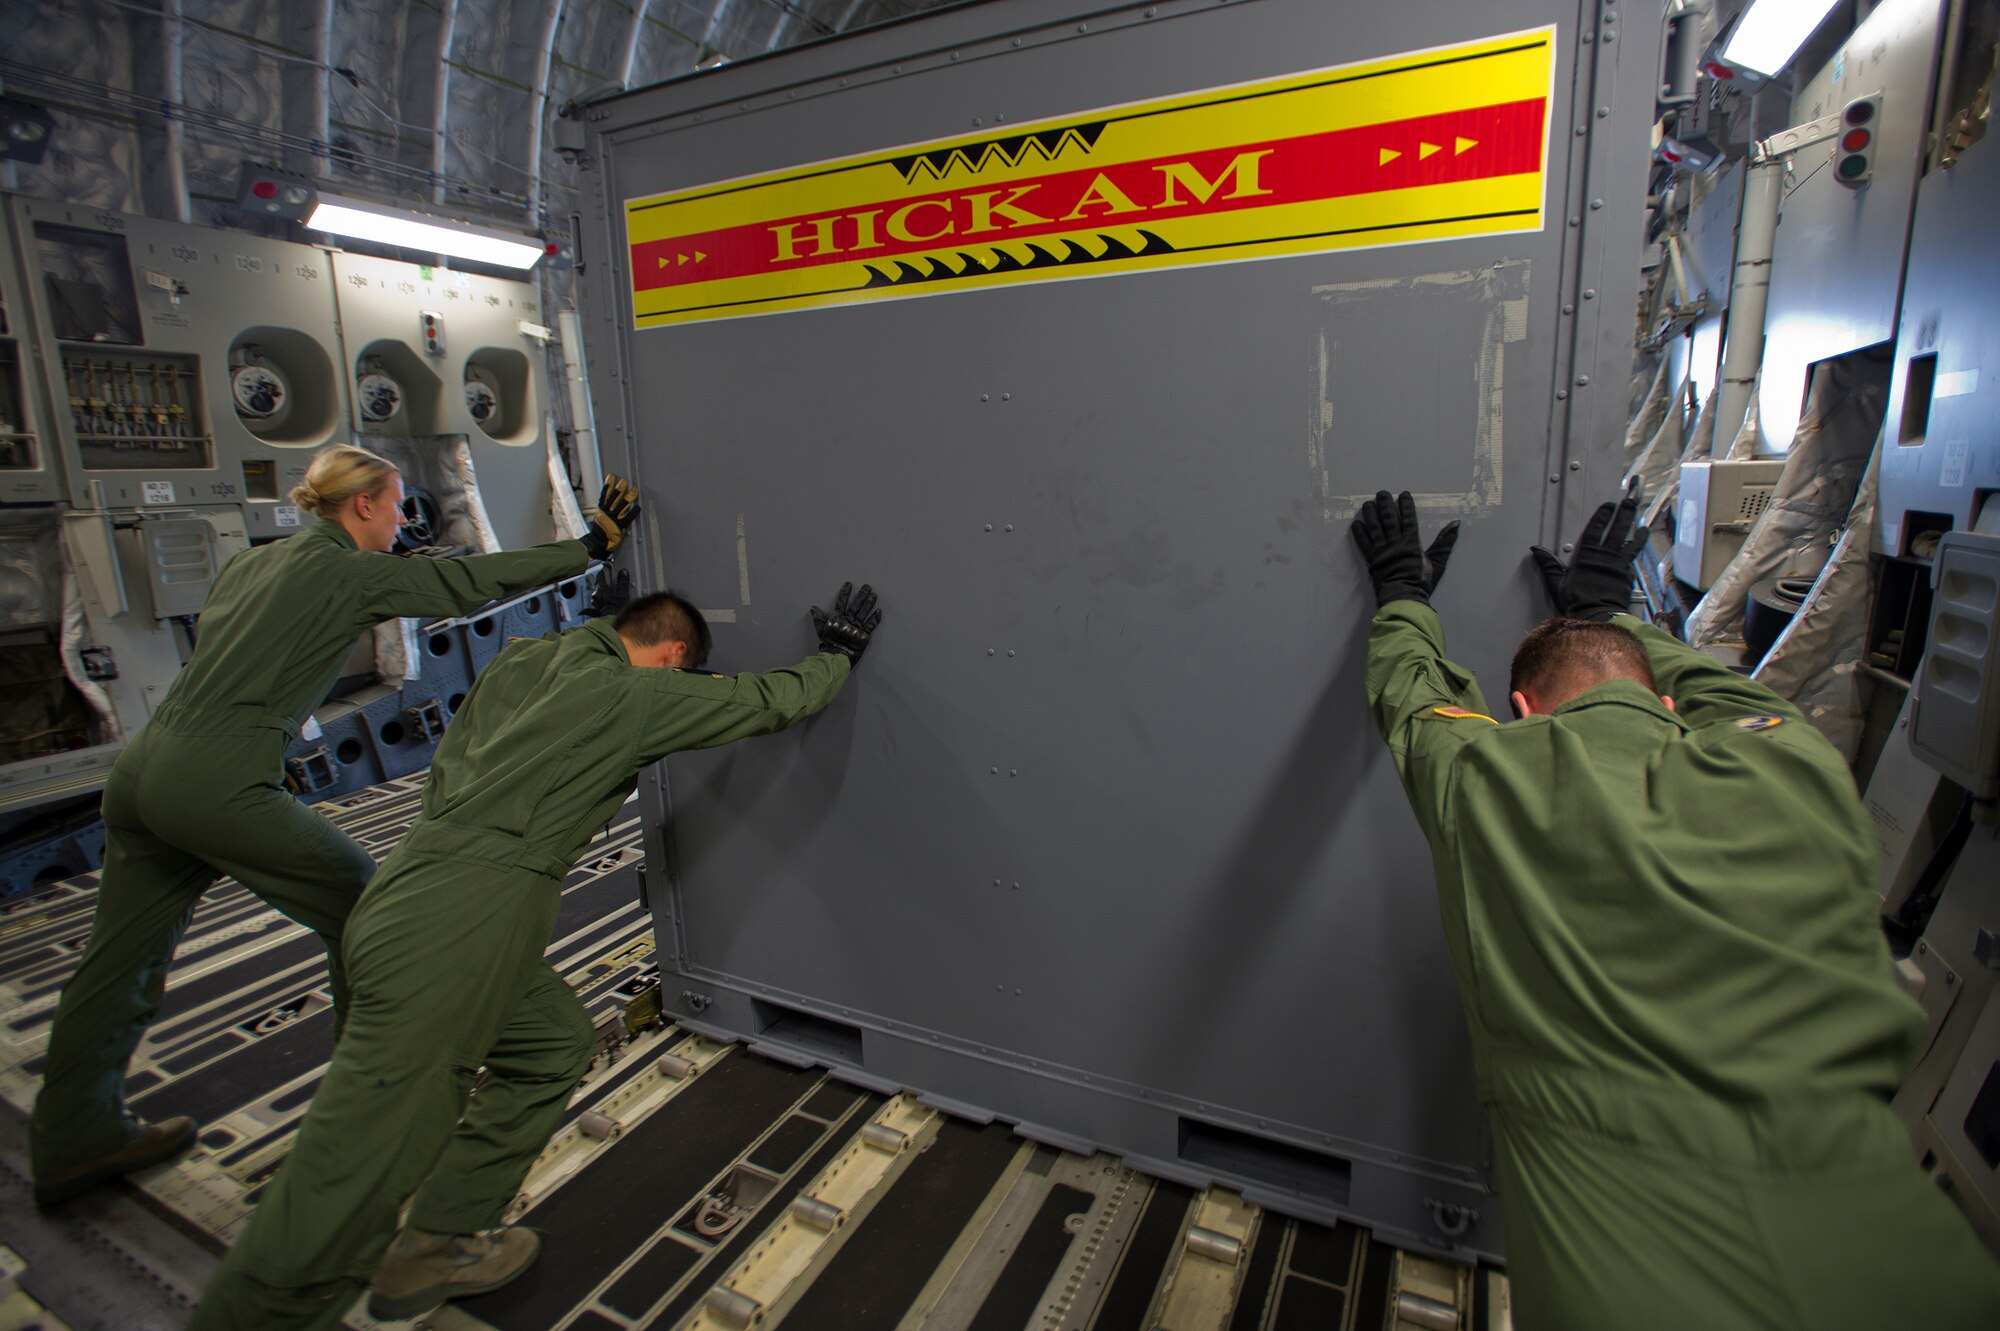 Joint Base Pearl Harbor-Hickam Airmen from the 535th Airlift Squadron unload a container from a C-17 Globemaster III at Rimba Air Base in preparation for the 4th Biennial Brunei Darussalam International Defense Exhibition, Dec. 1, 2013. JBPPH personnel will be showcasing the C-17 through static displays and aerial demonstrations during BRIDEX. The exhibition is an opportunity for networking and sharing technology with regional partners and allies, building strong multilateral relationships, increased cooperation and enhanced preparedness for disasters and other contingency operations. (U.S. Air Force photo/Master Sgt. Jerome S. Tayborn)